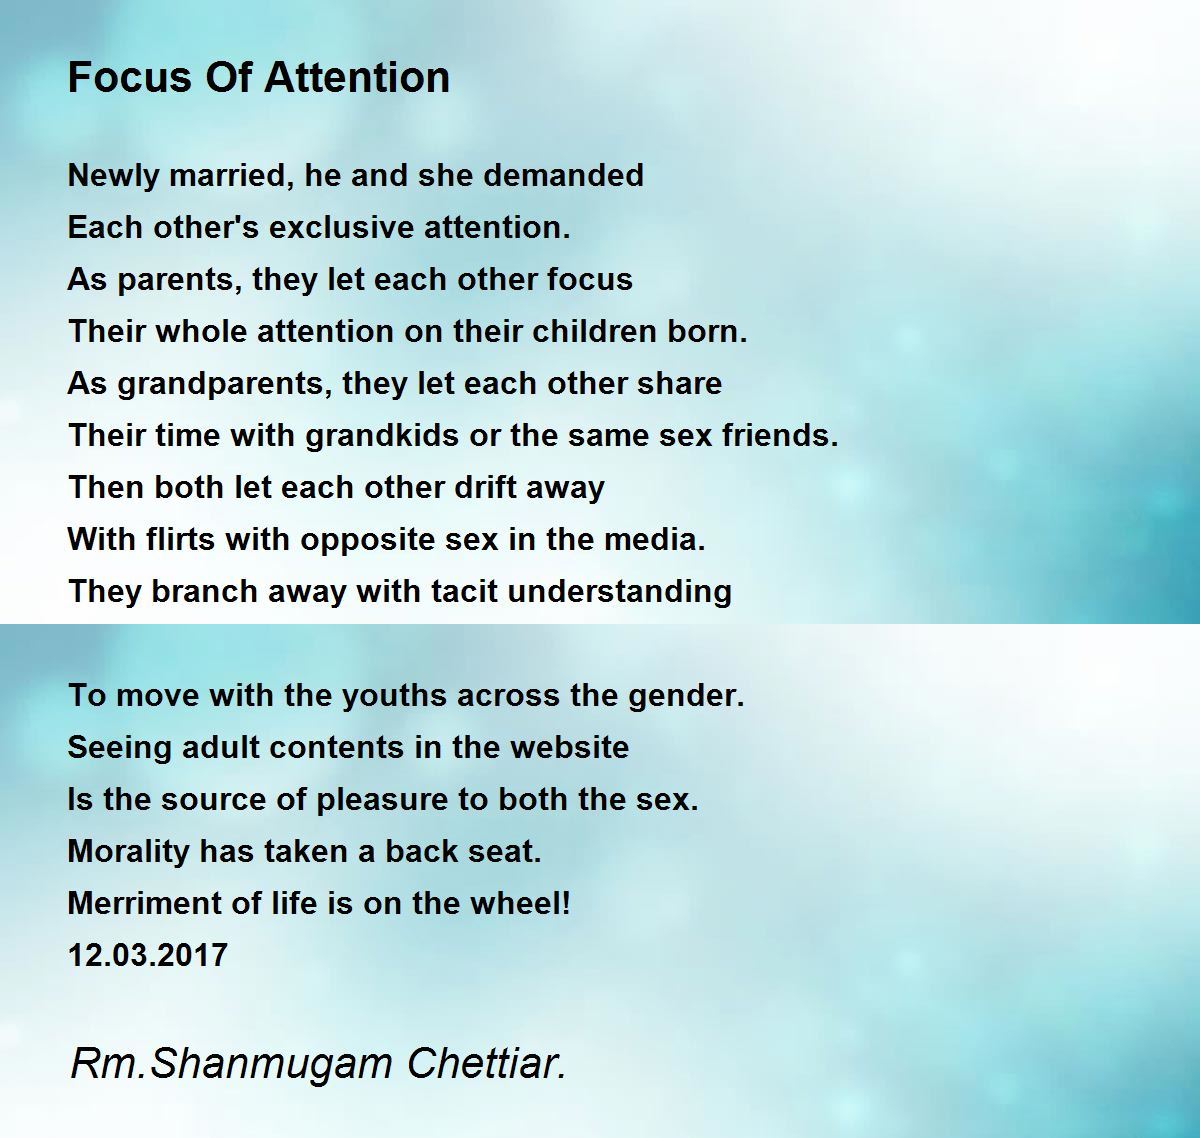 Focus Of Attention image